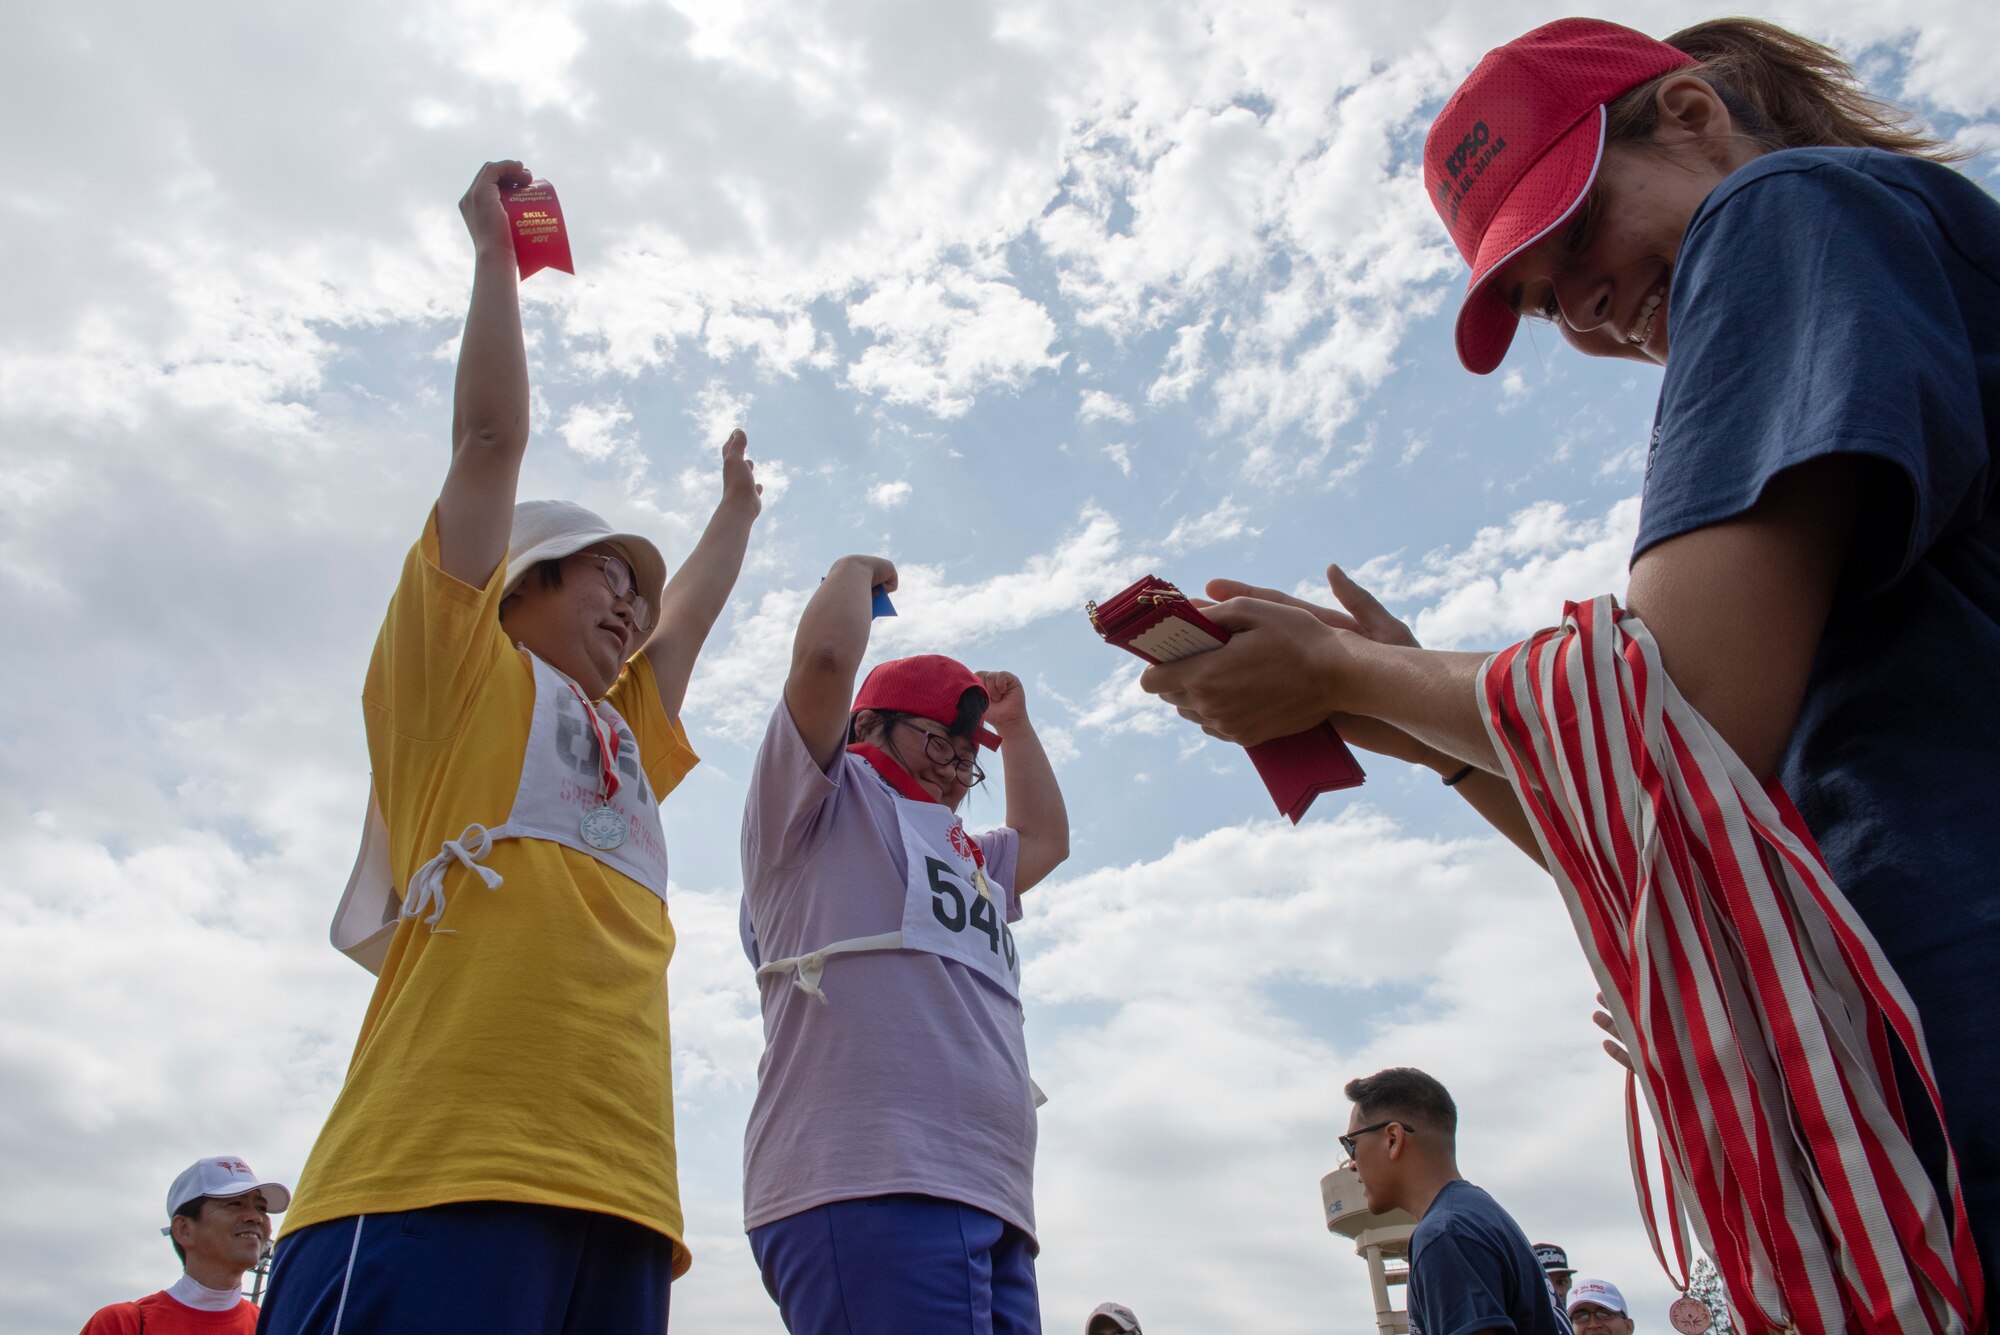 Athletes celebrate receiving their medals during the medal ceremony of the 50 meter sprint during the Kanto Plains Special Olympics at Yokota Air Base, Japan, May 19, 2018.